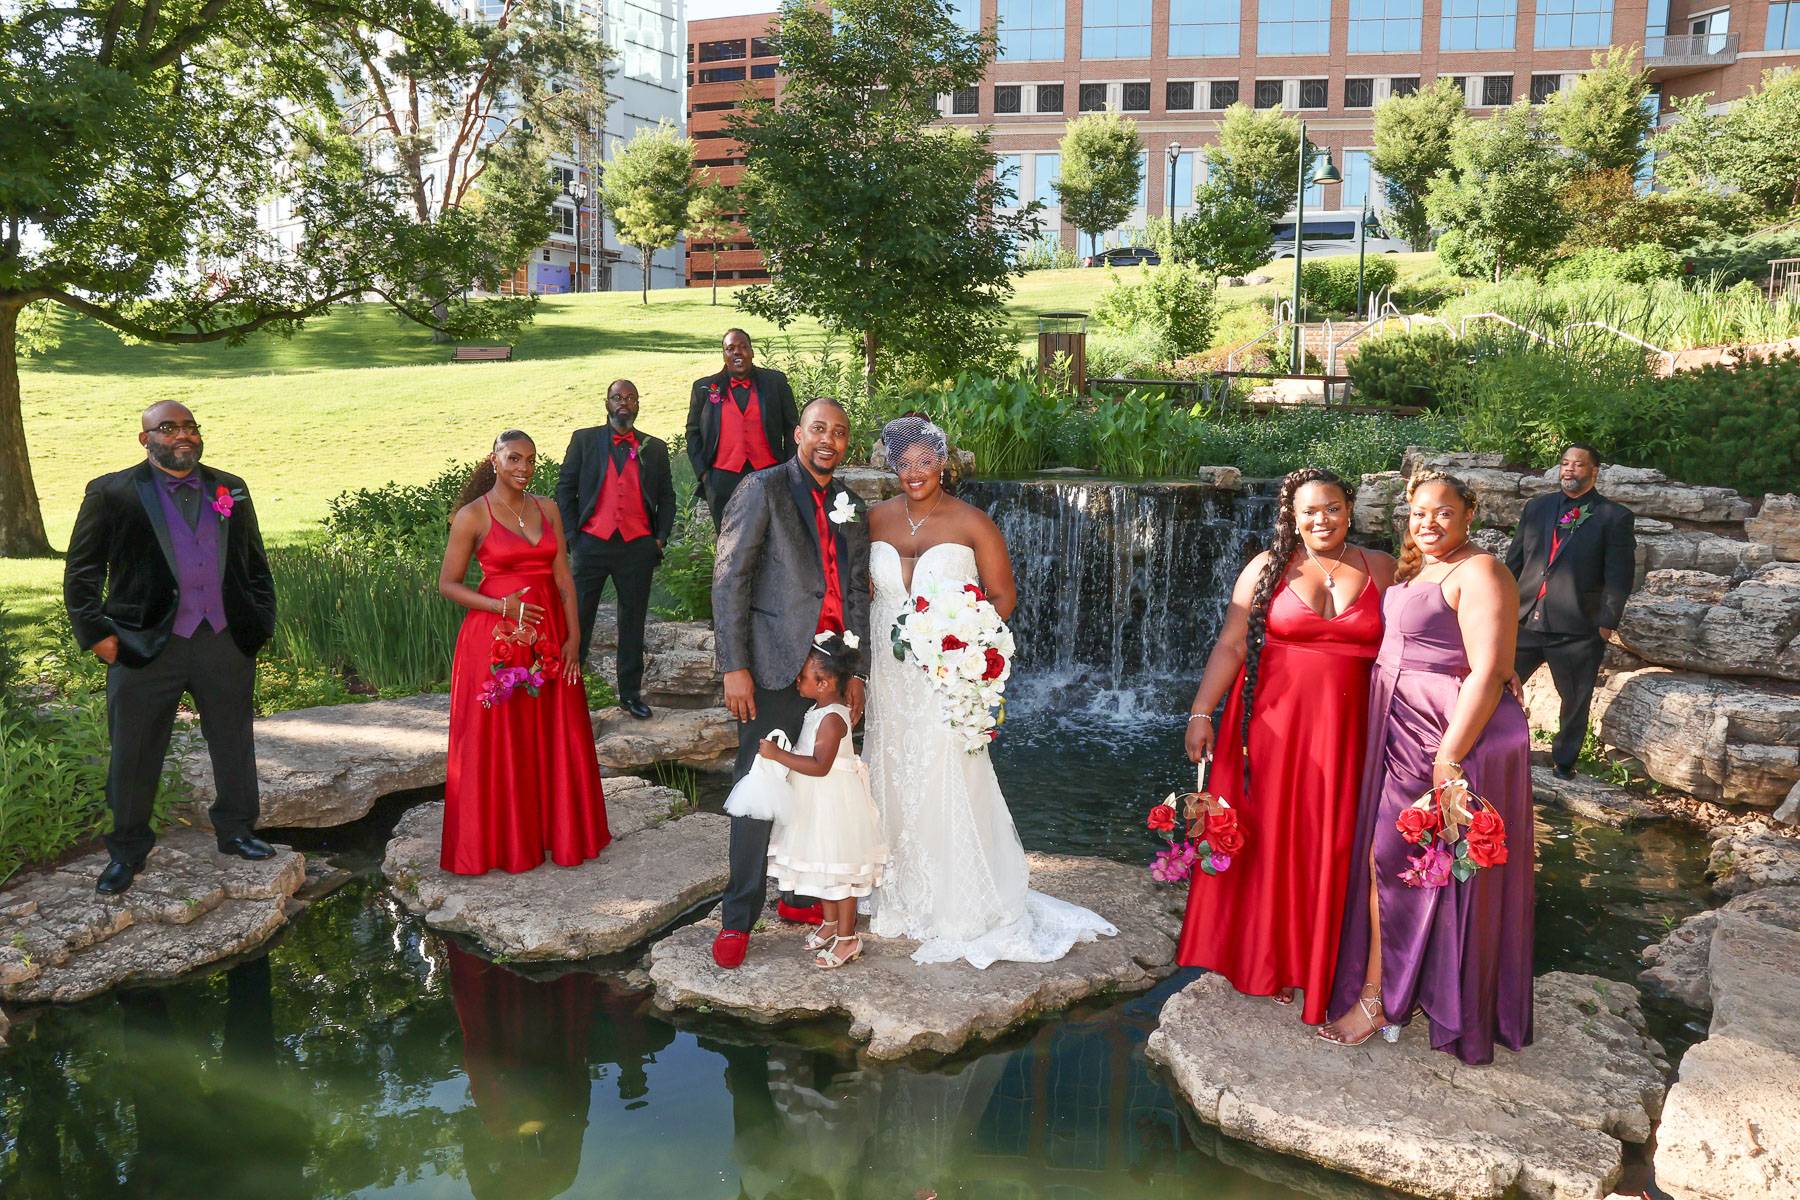 The newlyweds and their attendants at a pond